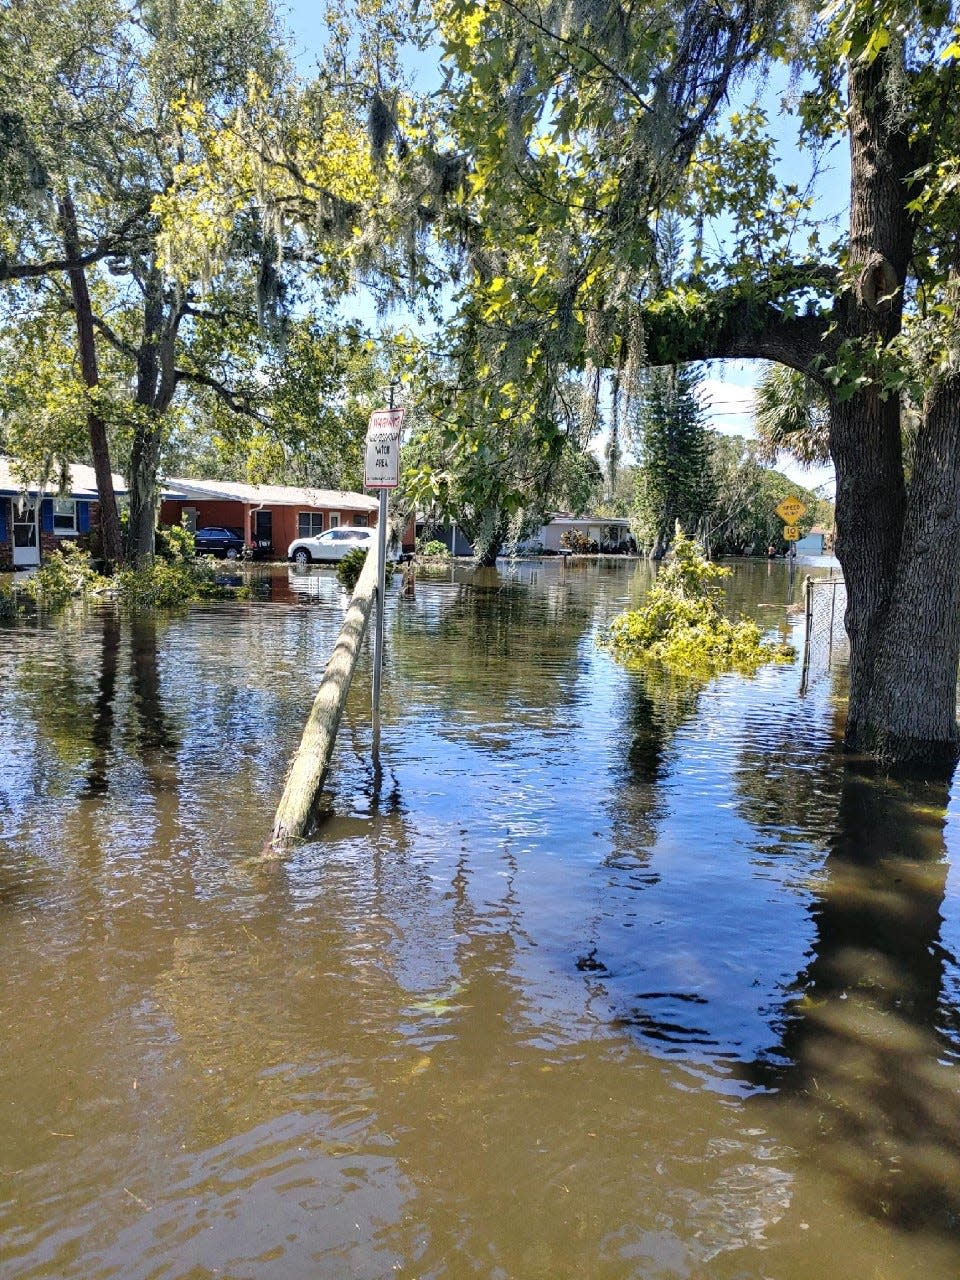 Daytona Beach's Midtown neighborhood was inundated with floodwater that rose as high as five feet in some areas of the community between Nova Road and Ridgewood Avenue. Pictured is Lockhart Street off of Kottle Circle as it looked after Tropical Storm Ian blew through Volusia County in late September.